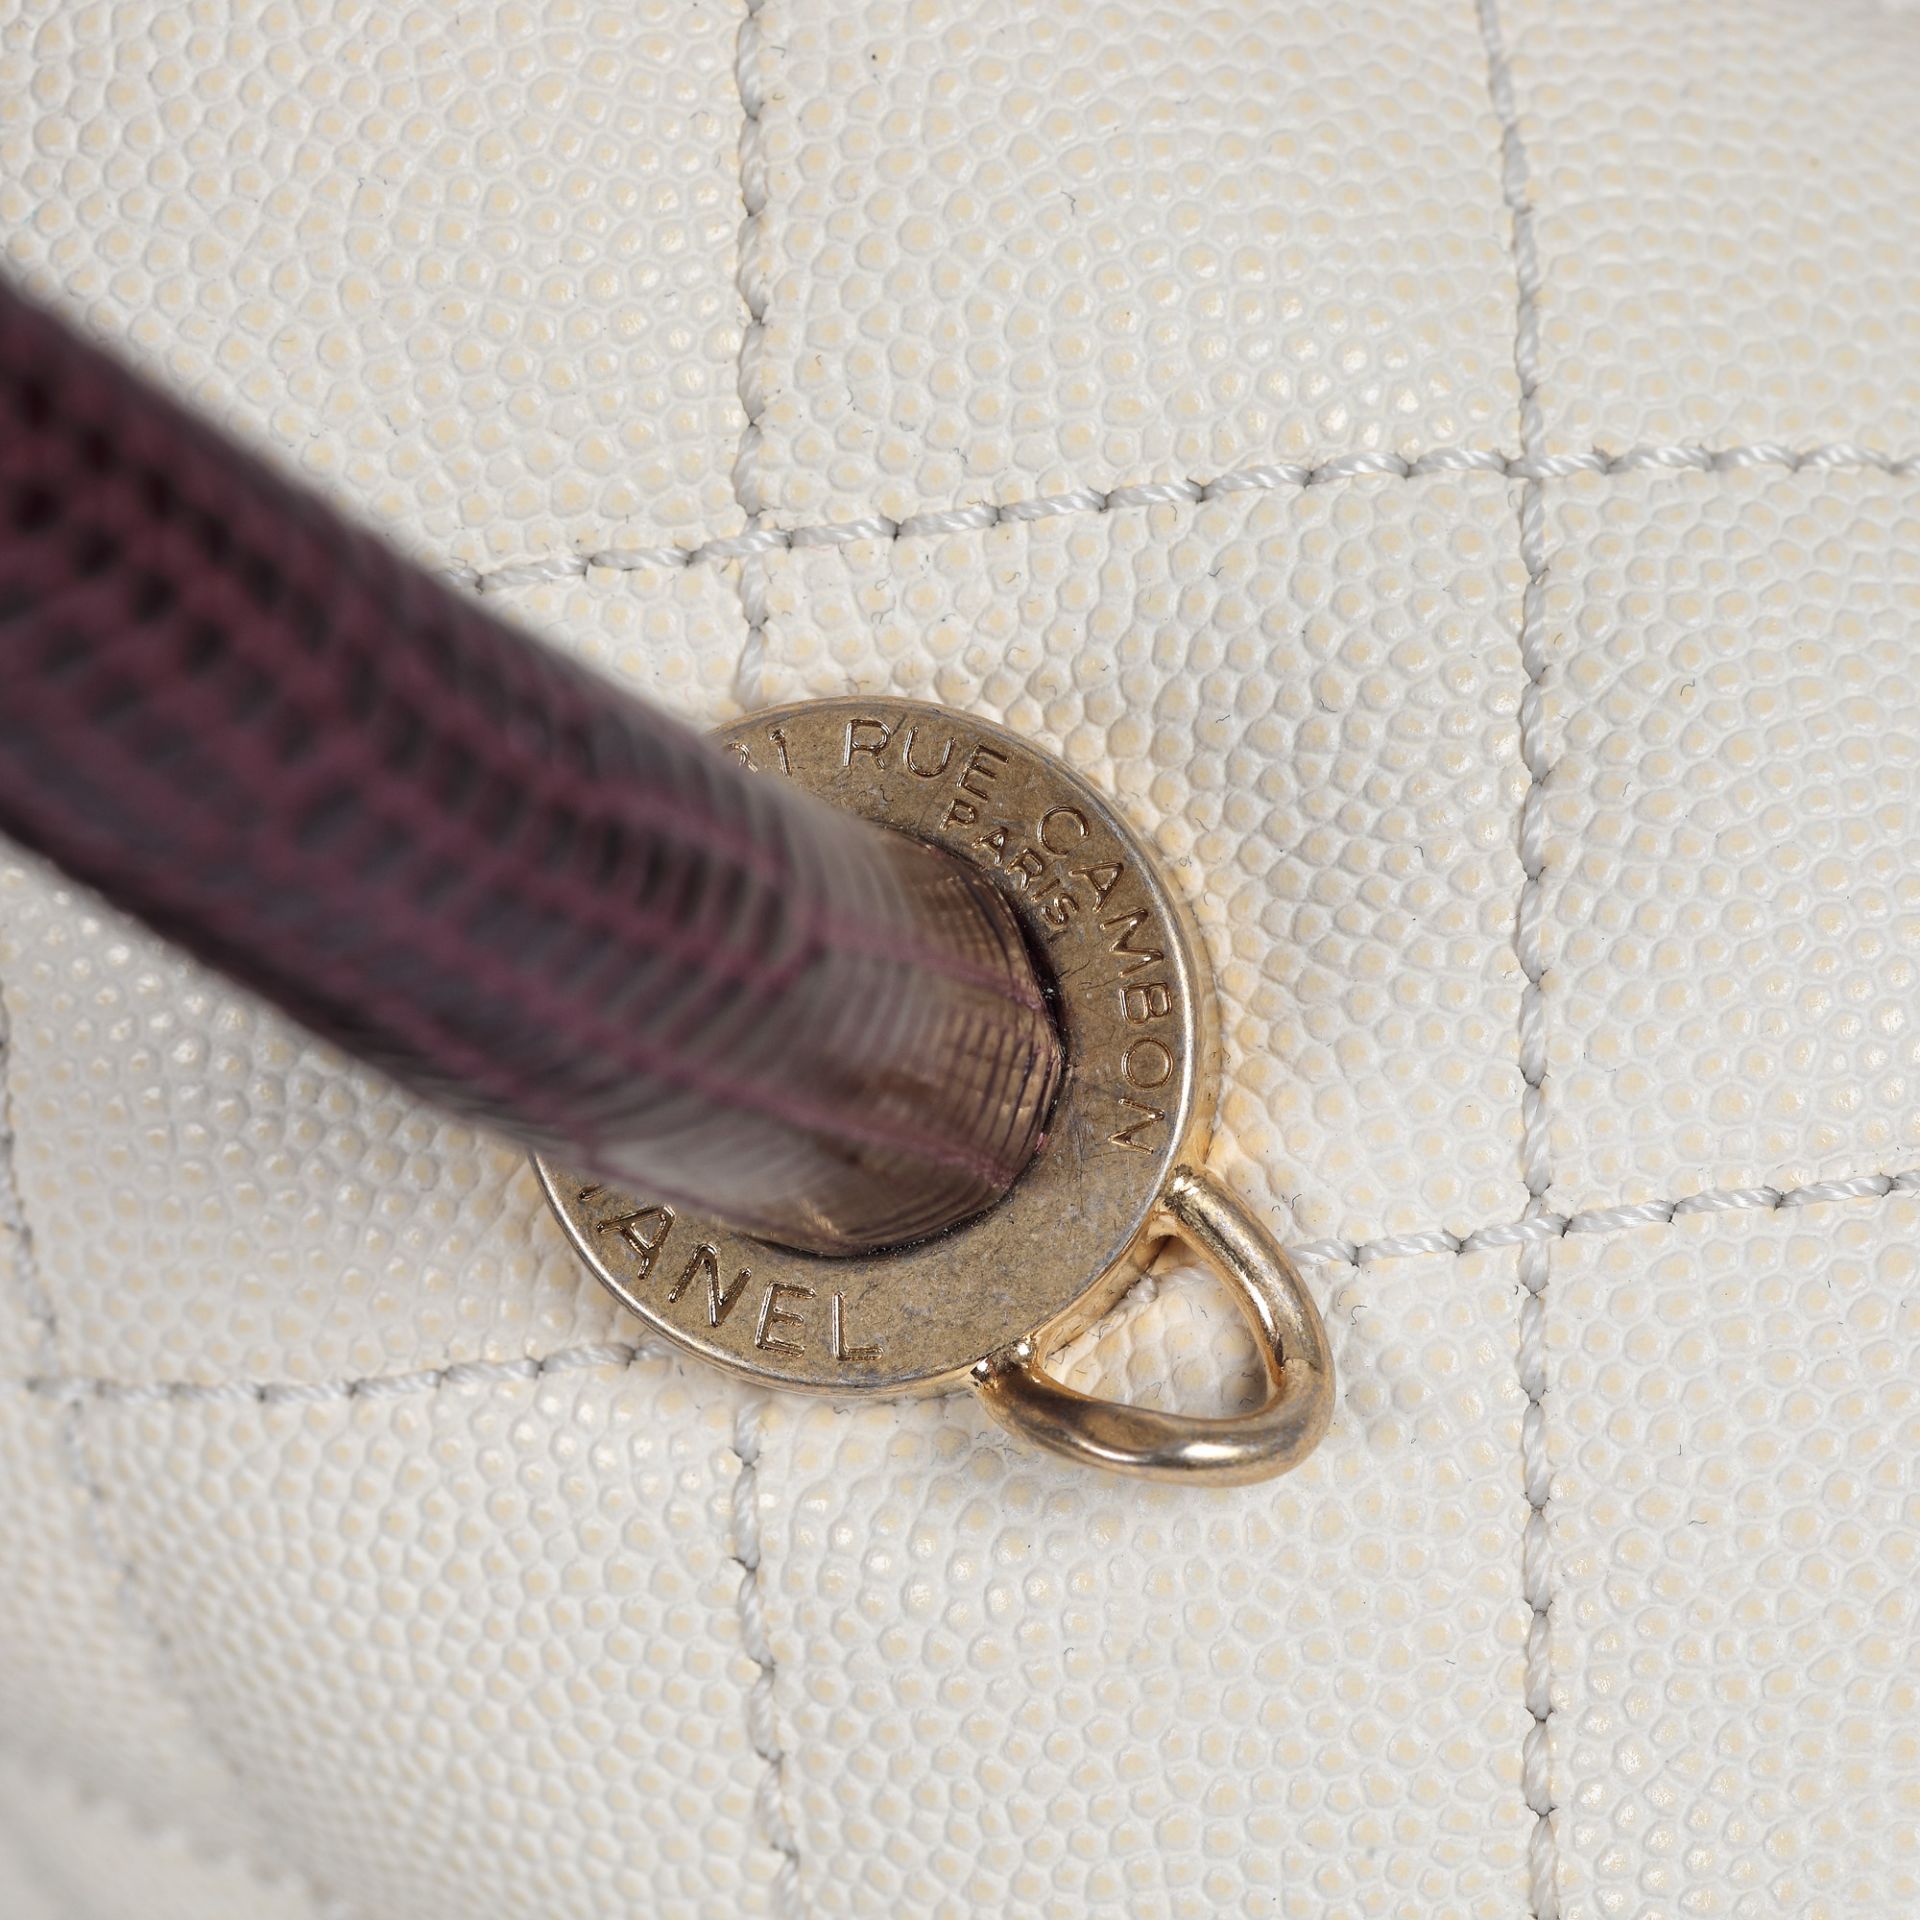 "Coco Handle Bag" - Chanel bag, quilted leather, white, lizard leather handle, burgundy - Image 5 of 11